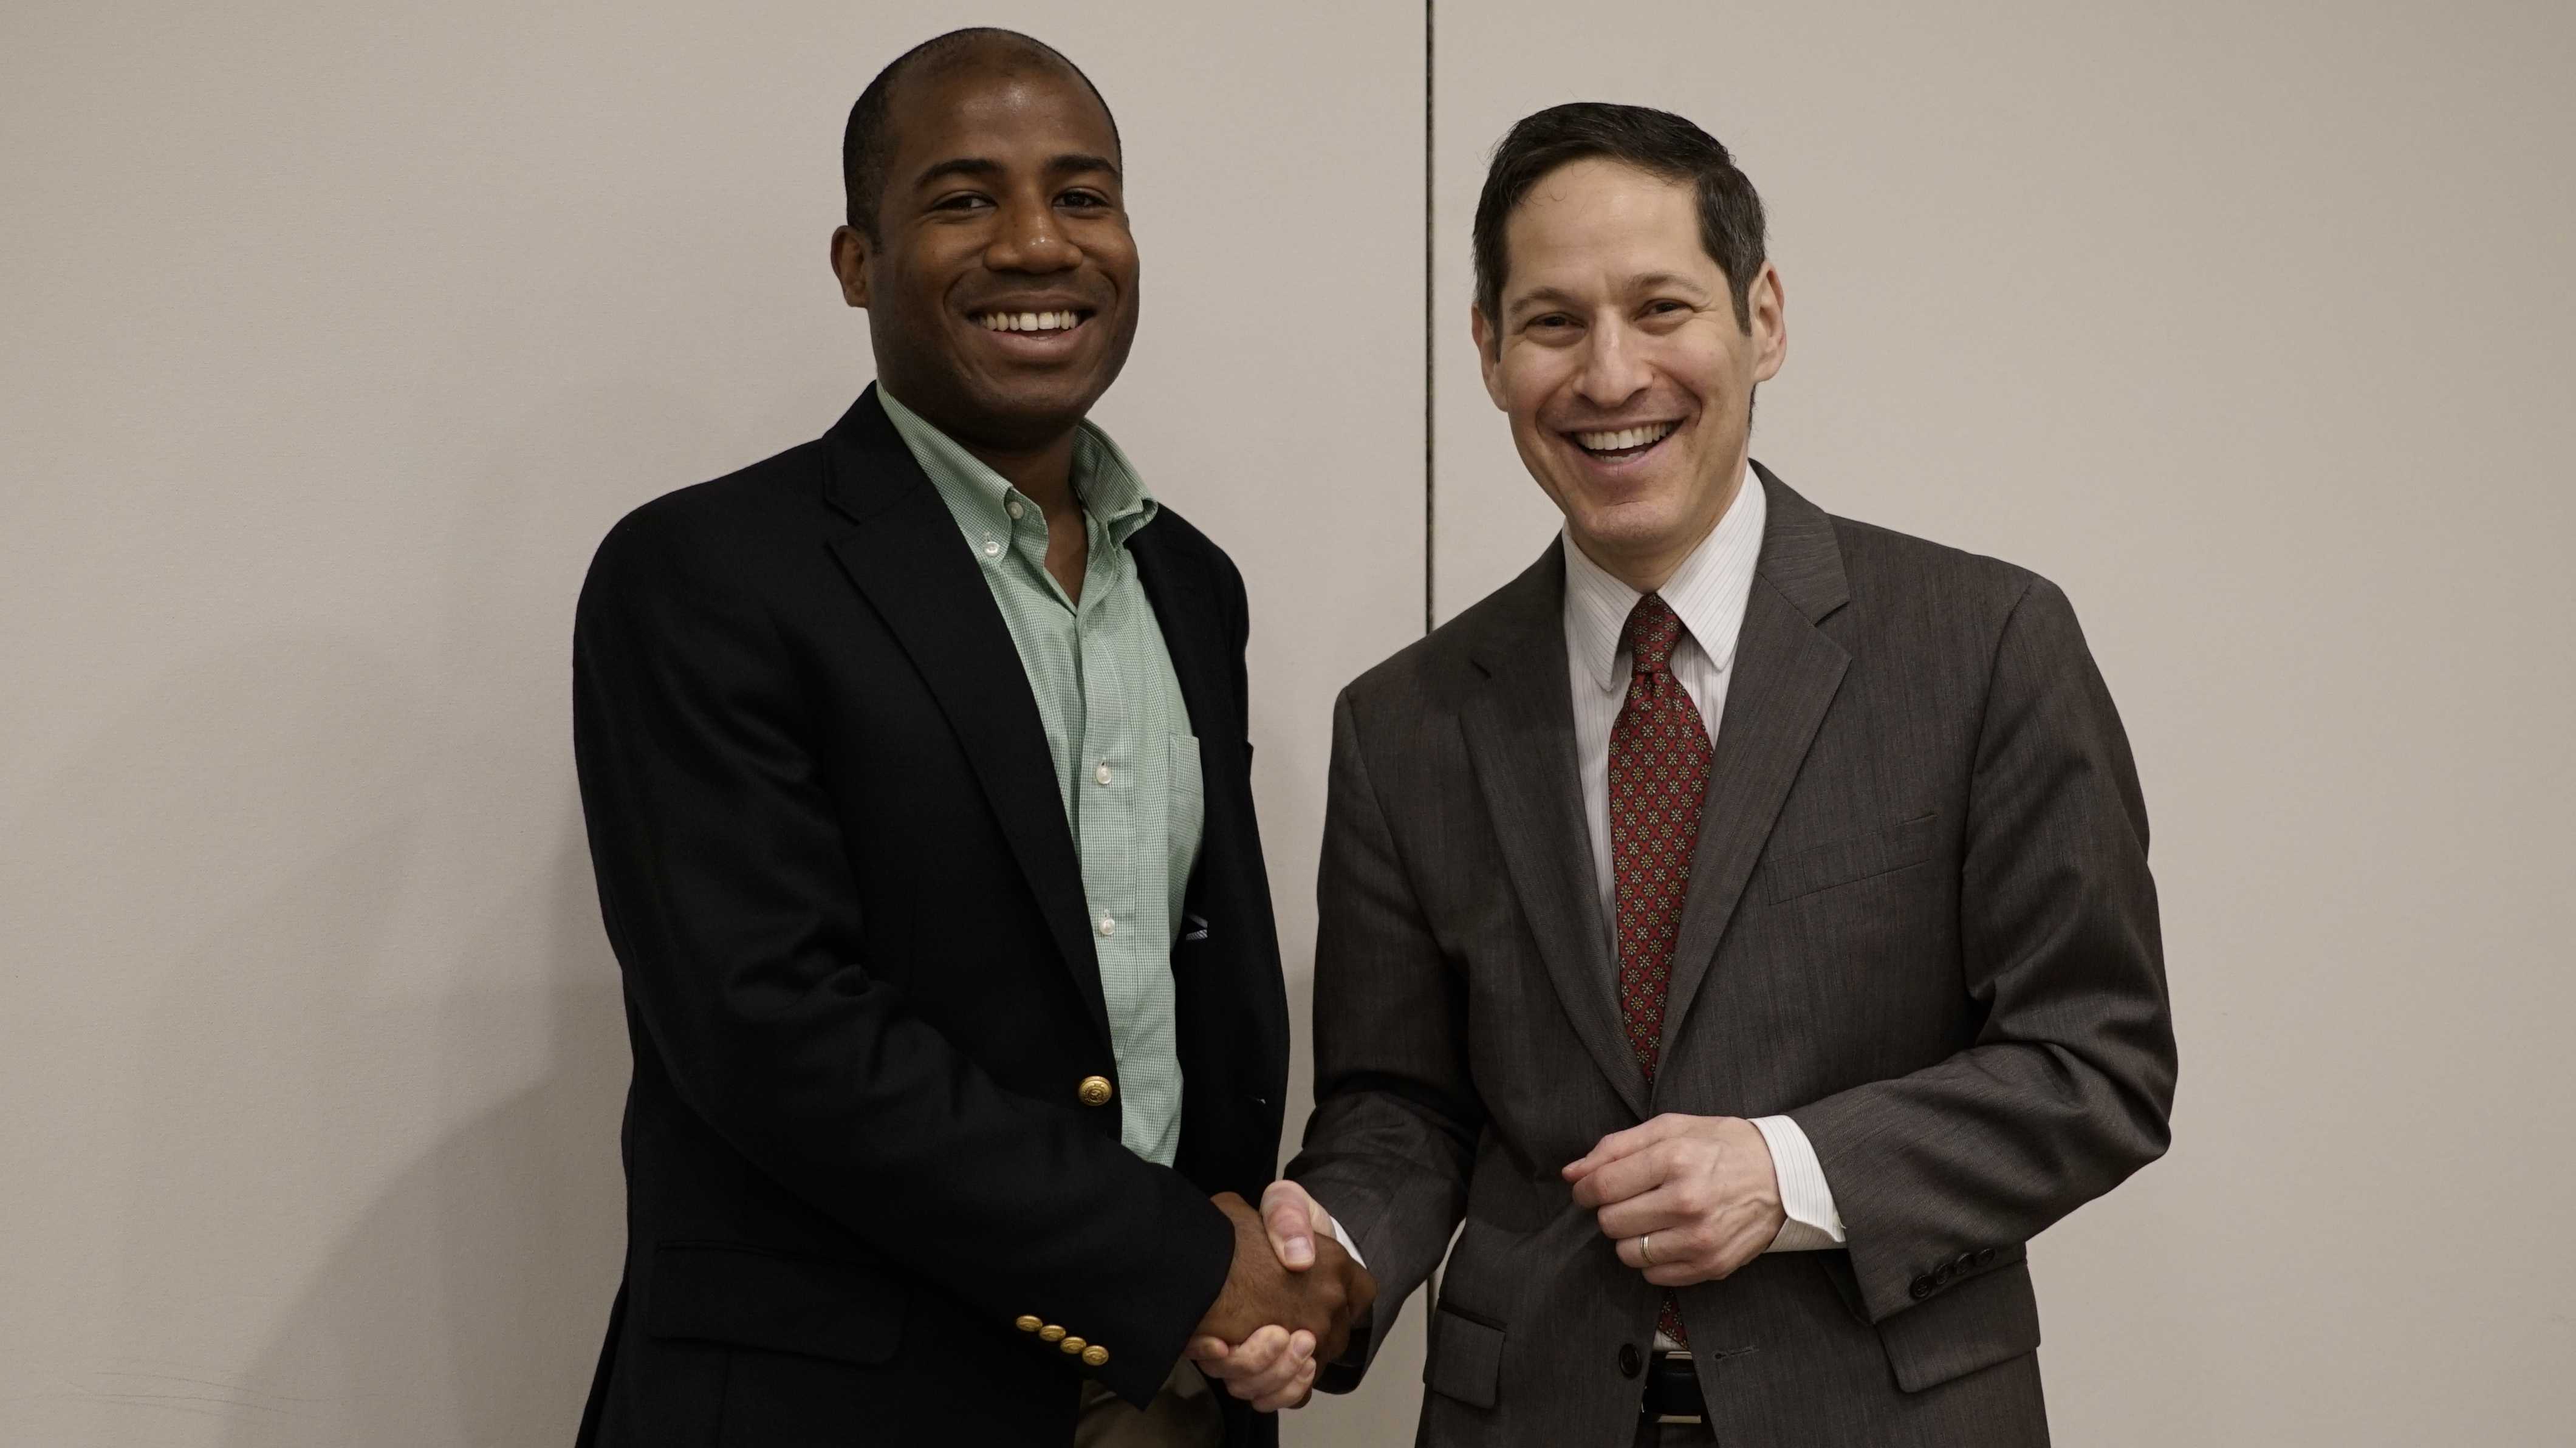 Roberto shakes hands with CDC Director Dr. Tom Frieden while acting as his on-the-ground control officer in Puerto Rico.